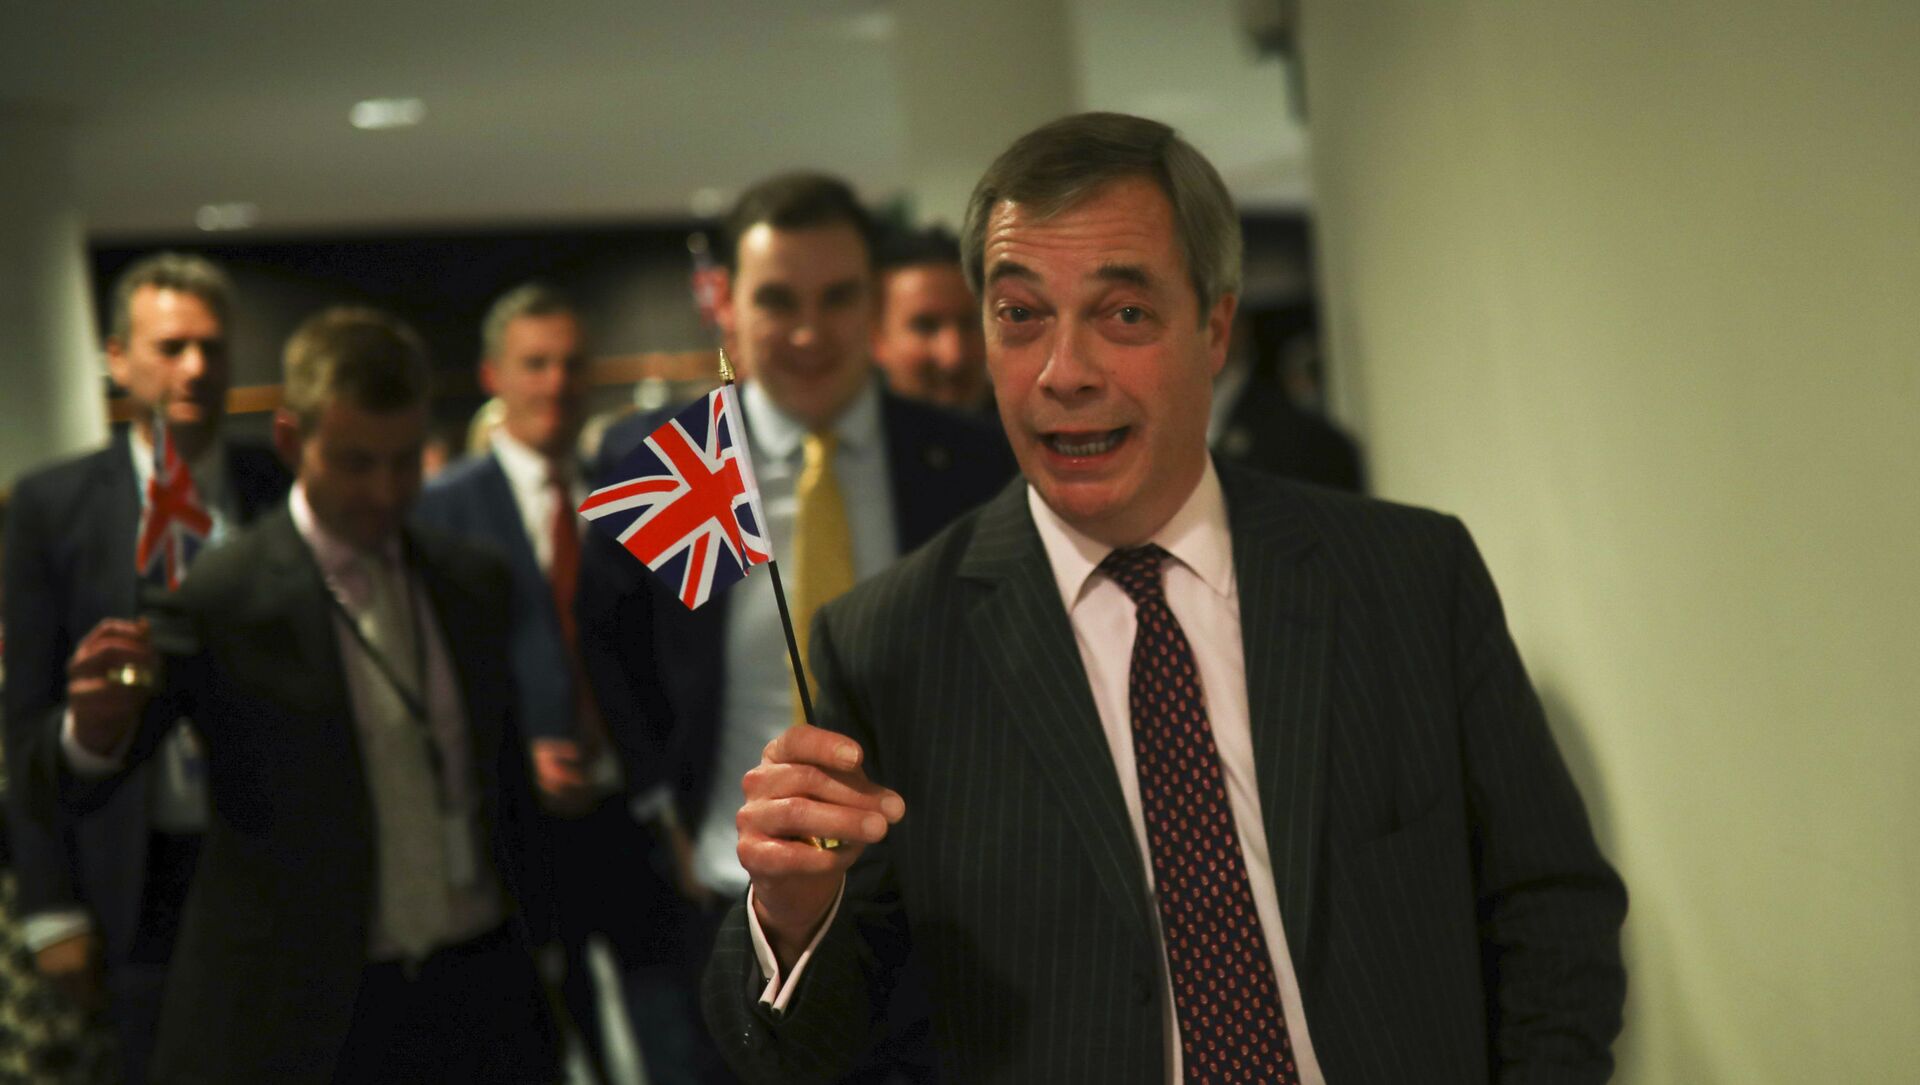 British European Parliament member Nigel Farage leaves the hemicycle after addressing European lawmakers during the plenary session at the European Parliament in Brussels, Wednesday, Jan. 29, 2020 - Sputnik International, 1920, 07.03.2021